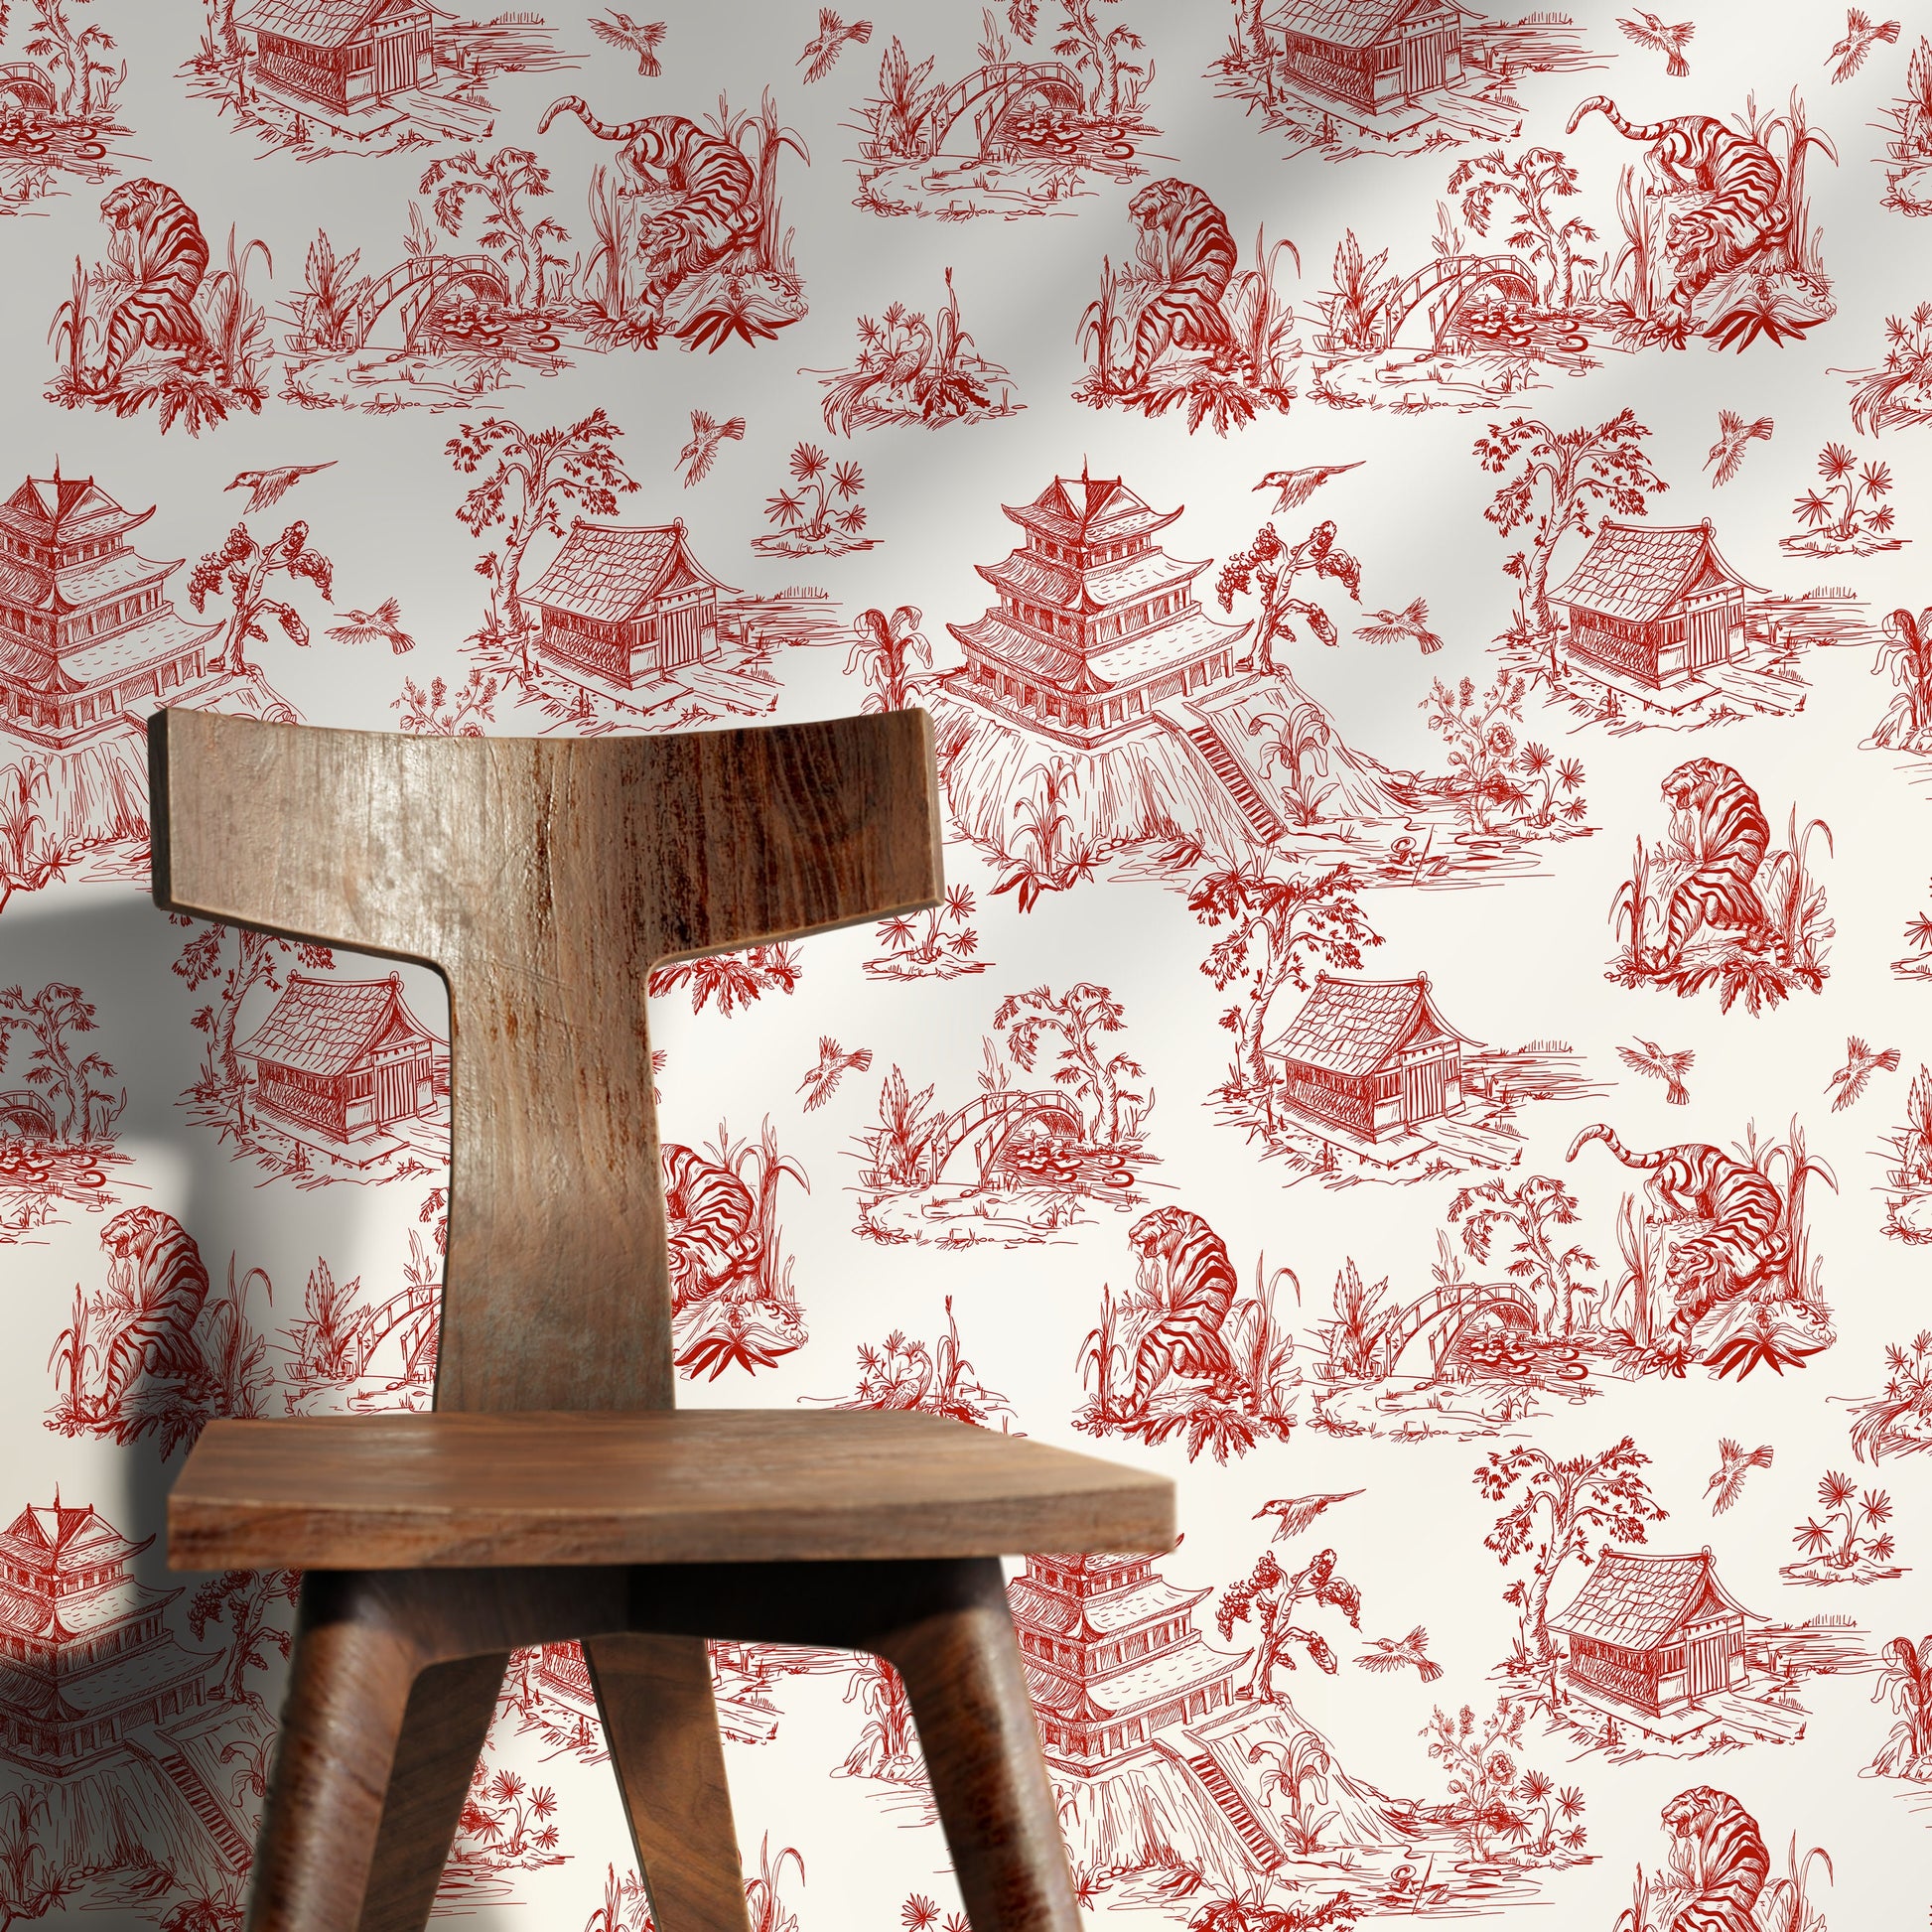 Dragon Waves Wallpaper - Removable Wallpaper Peel and Stick Wallpaper Wall Paper - C105